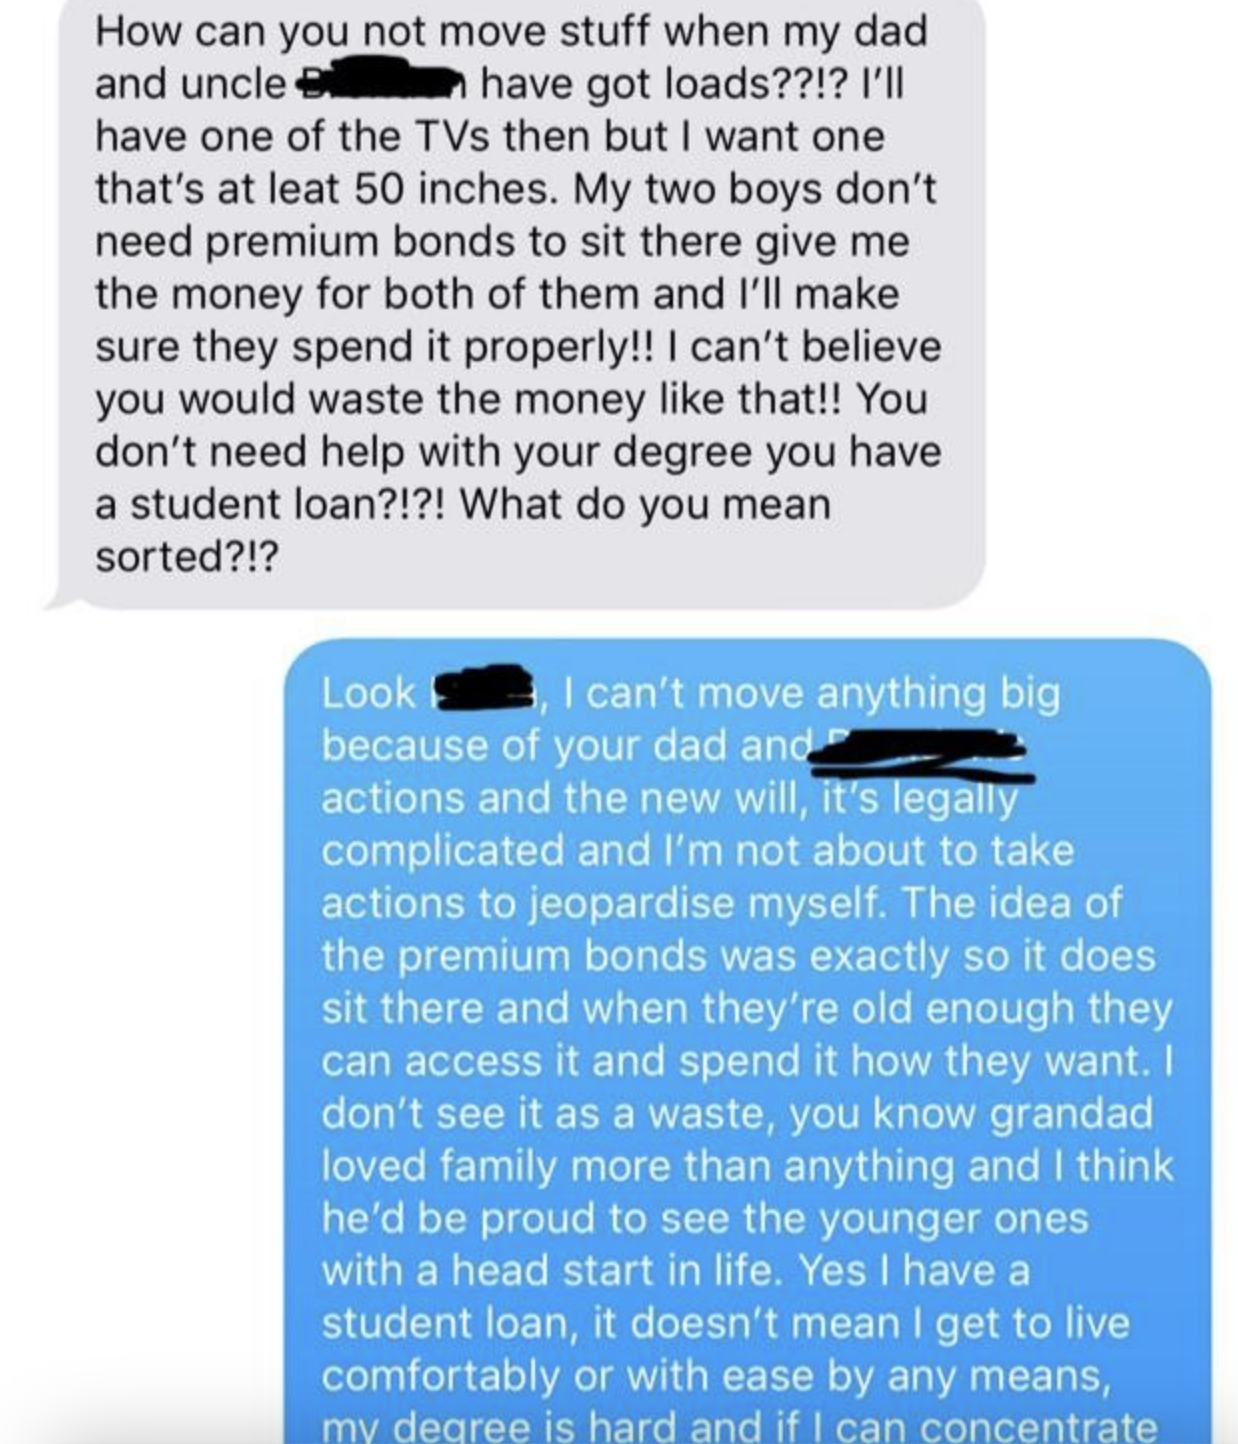 person 1 mad and wanting more of the appliances and tvs available, and wanting the money in cash instead of bonds and person 2 saying there are legalities that prevent them from doing so